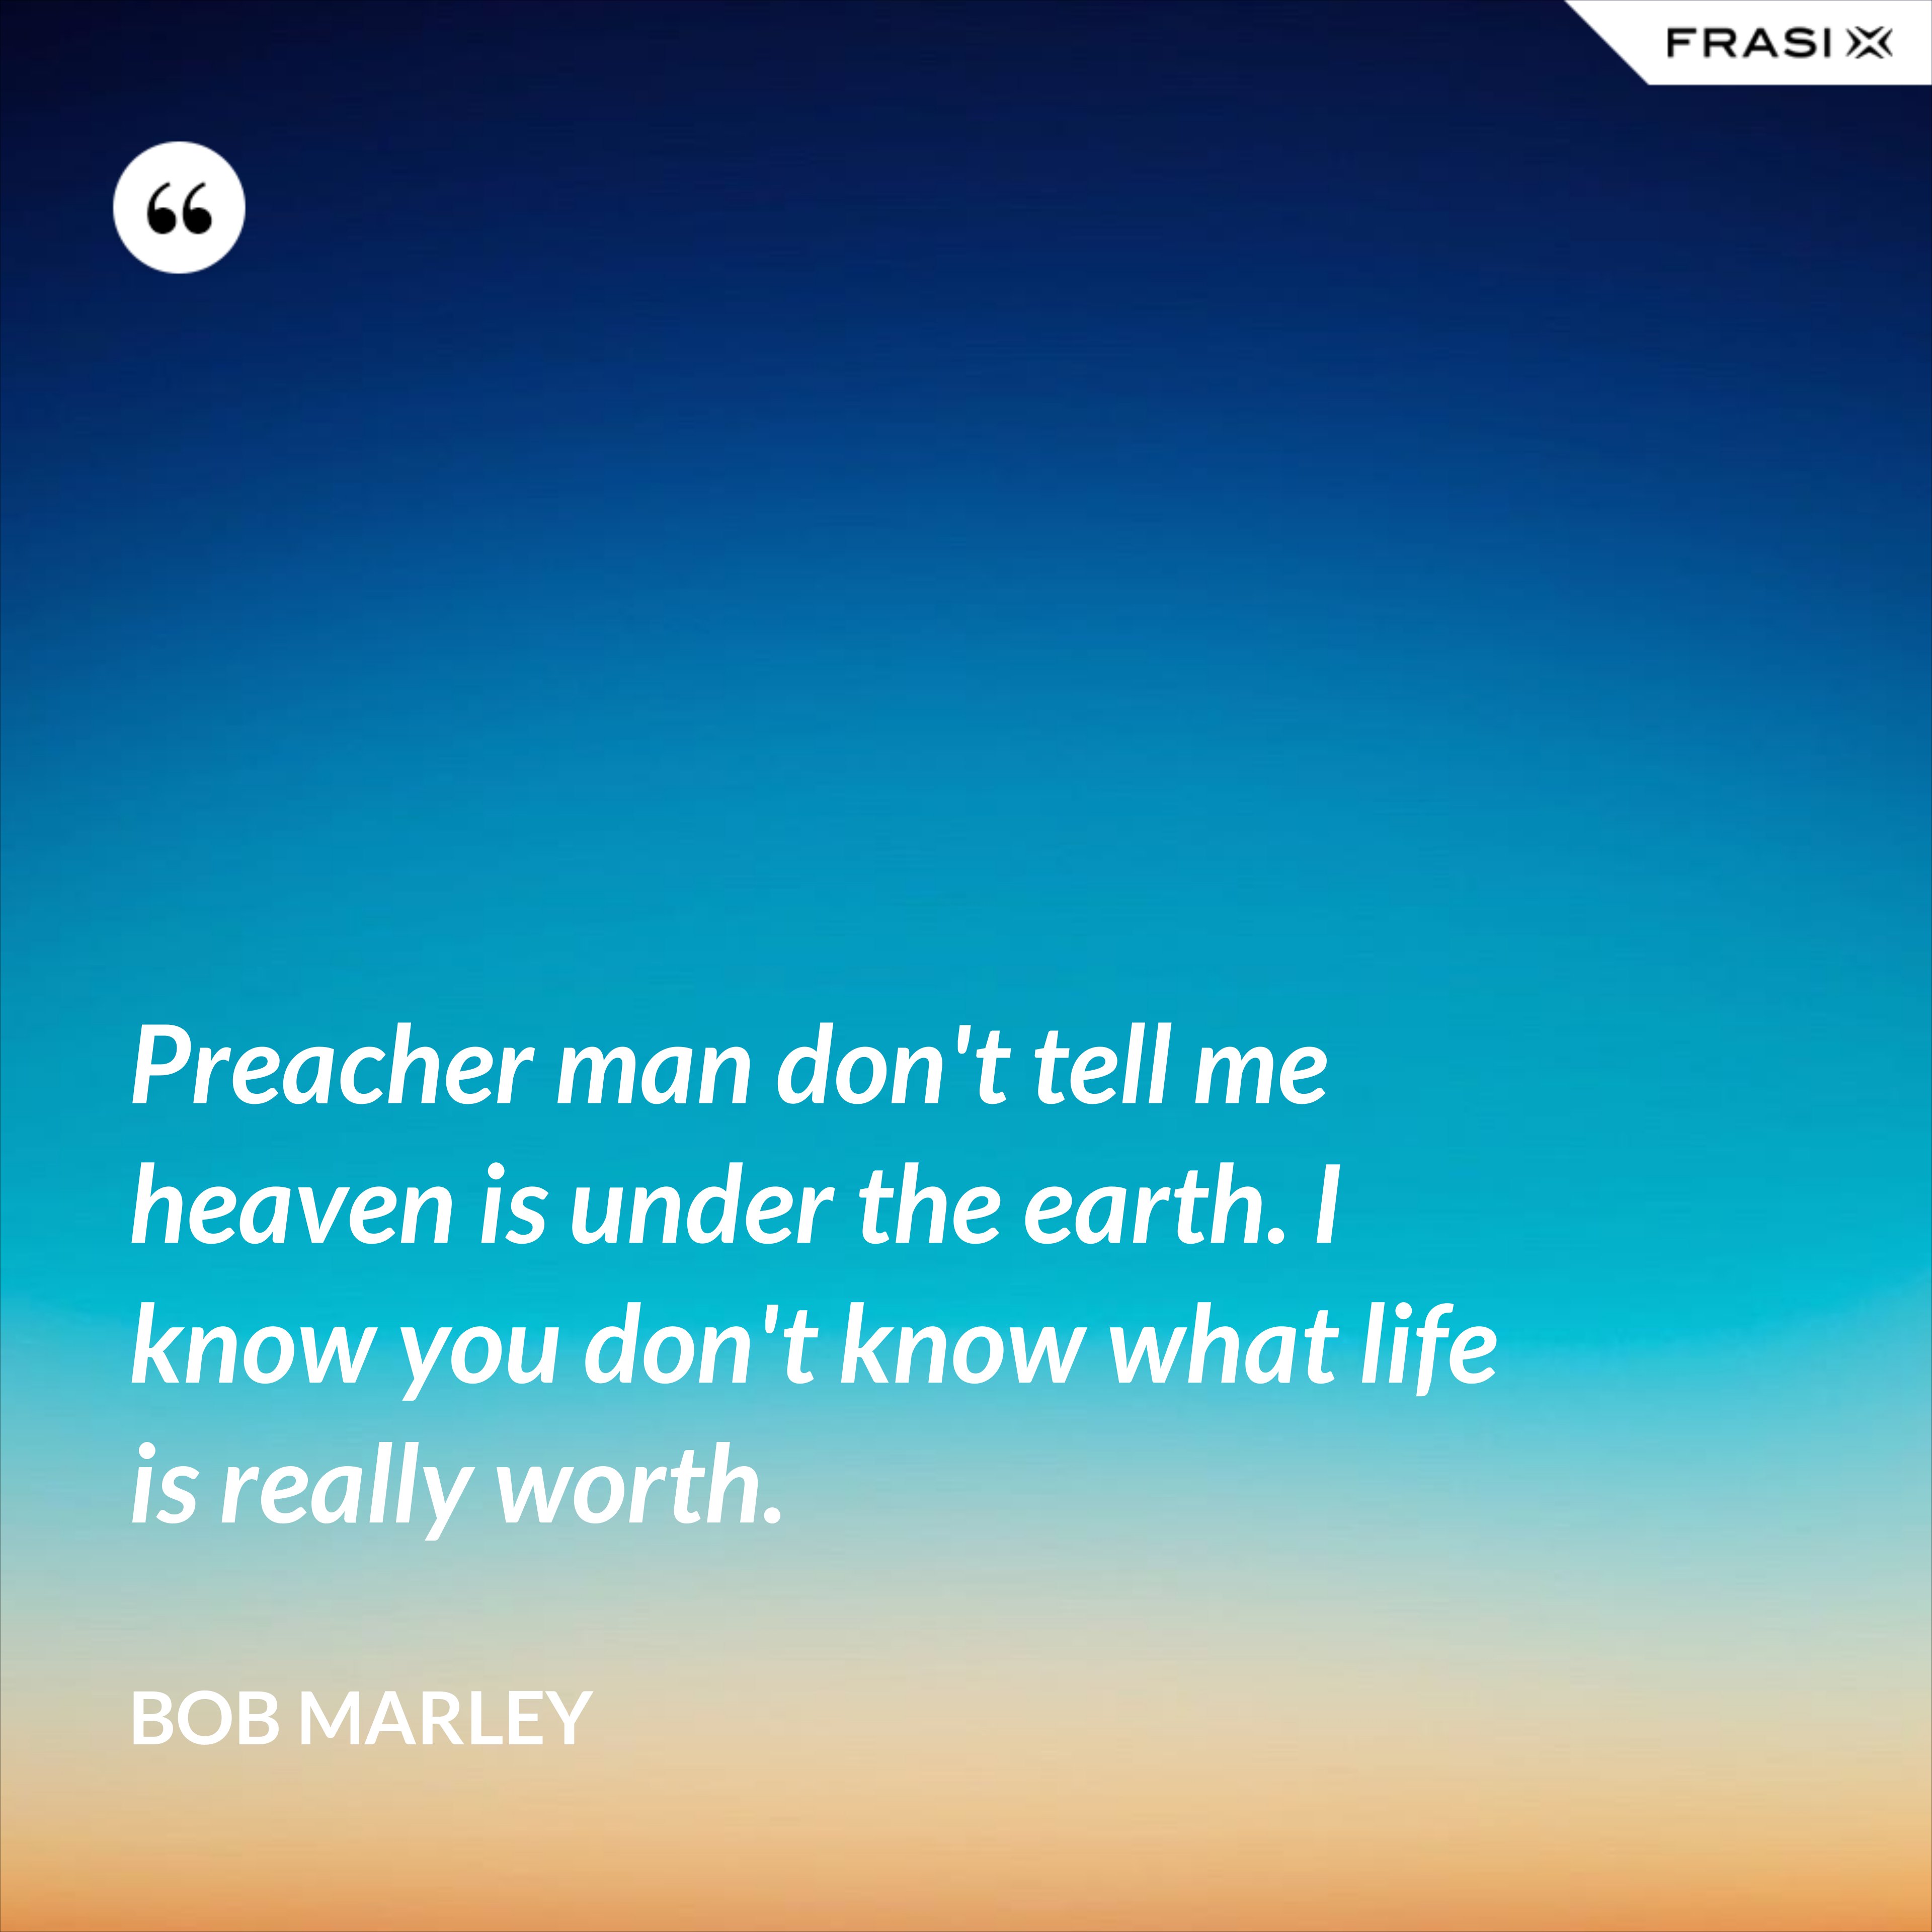 Preacher man don't tell me heaven is under the earth. I know you don't know what life is really worth. - Bob Marley